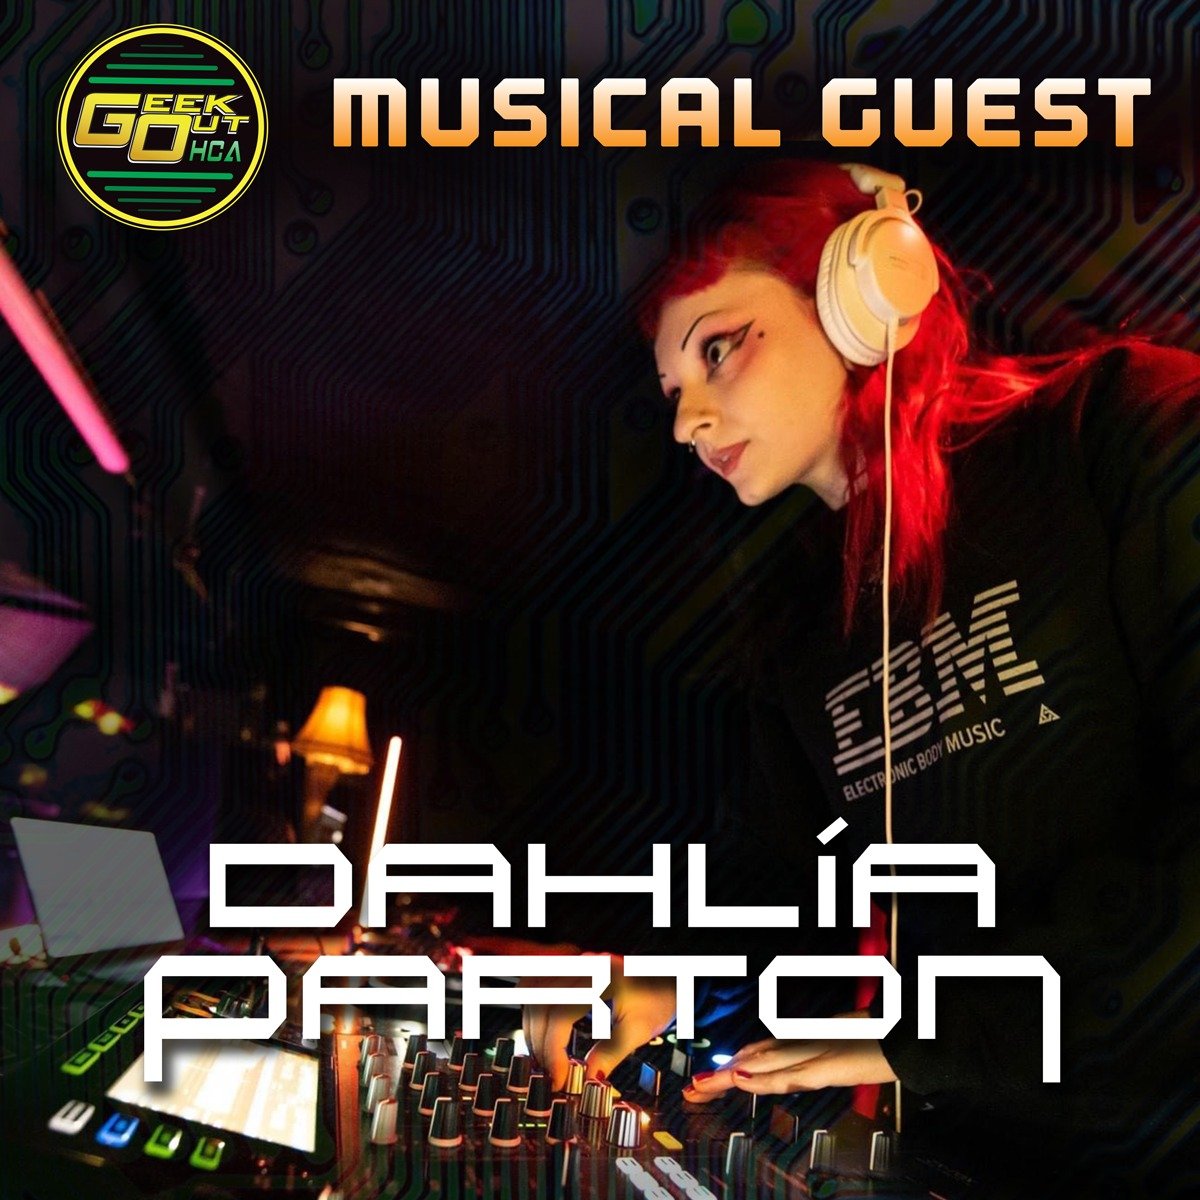   MUSICAL GUEST ANNOUNCEMENT  Dahlia Parton is returning and bringing the beats you can catch her sets on Main Stage on Friday Night and an encore in the Party Barn on Saturday!  